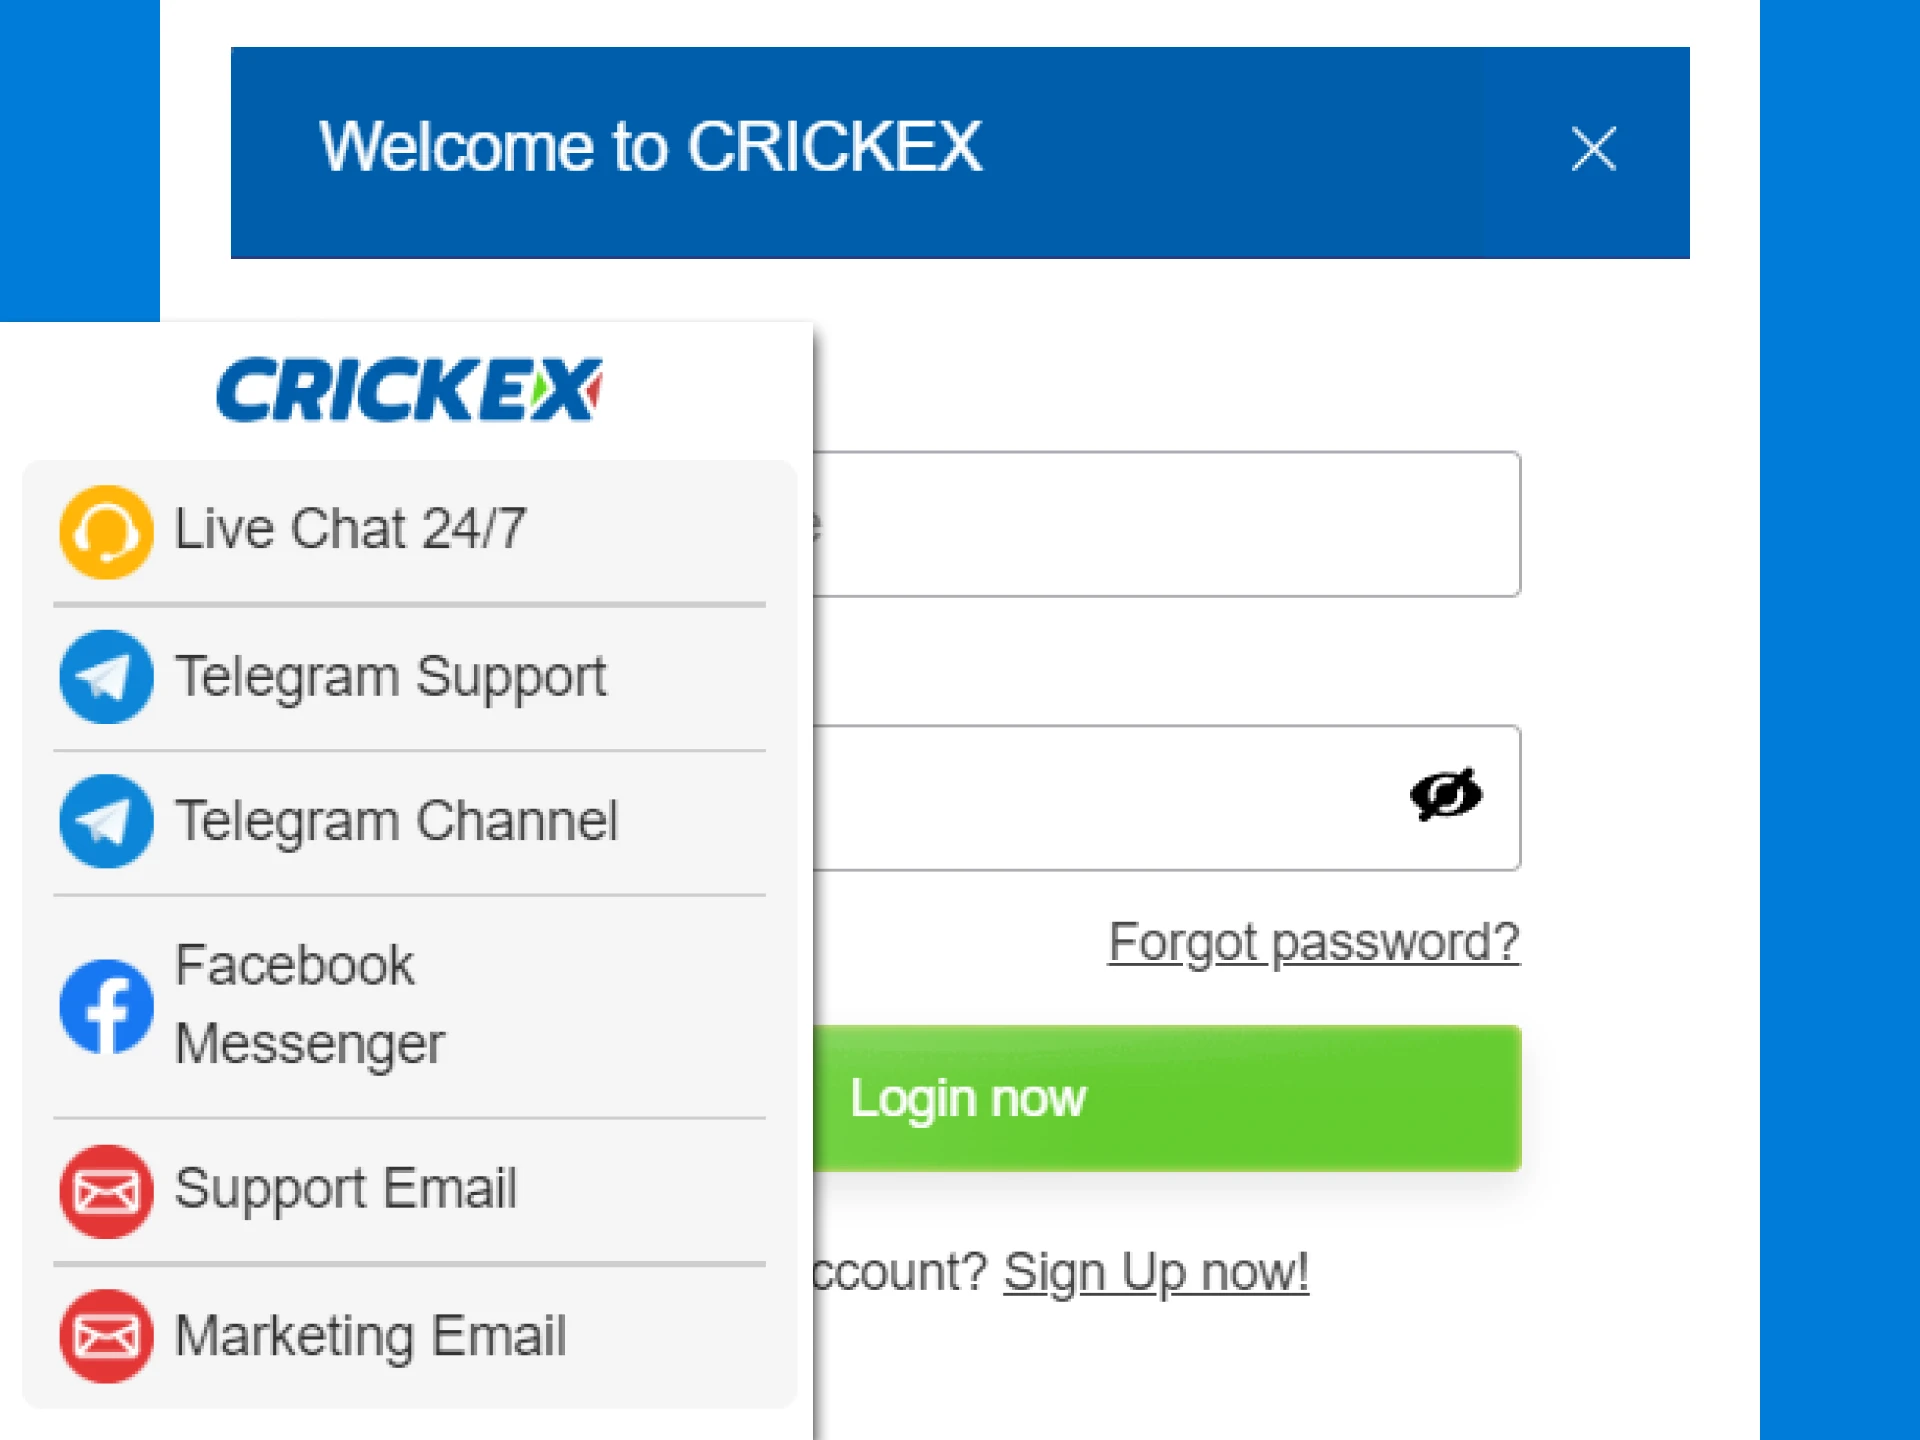 Find out how to reset your password on the Crickex service.